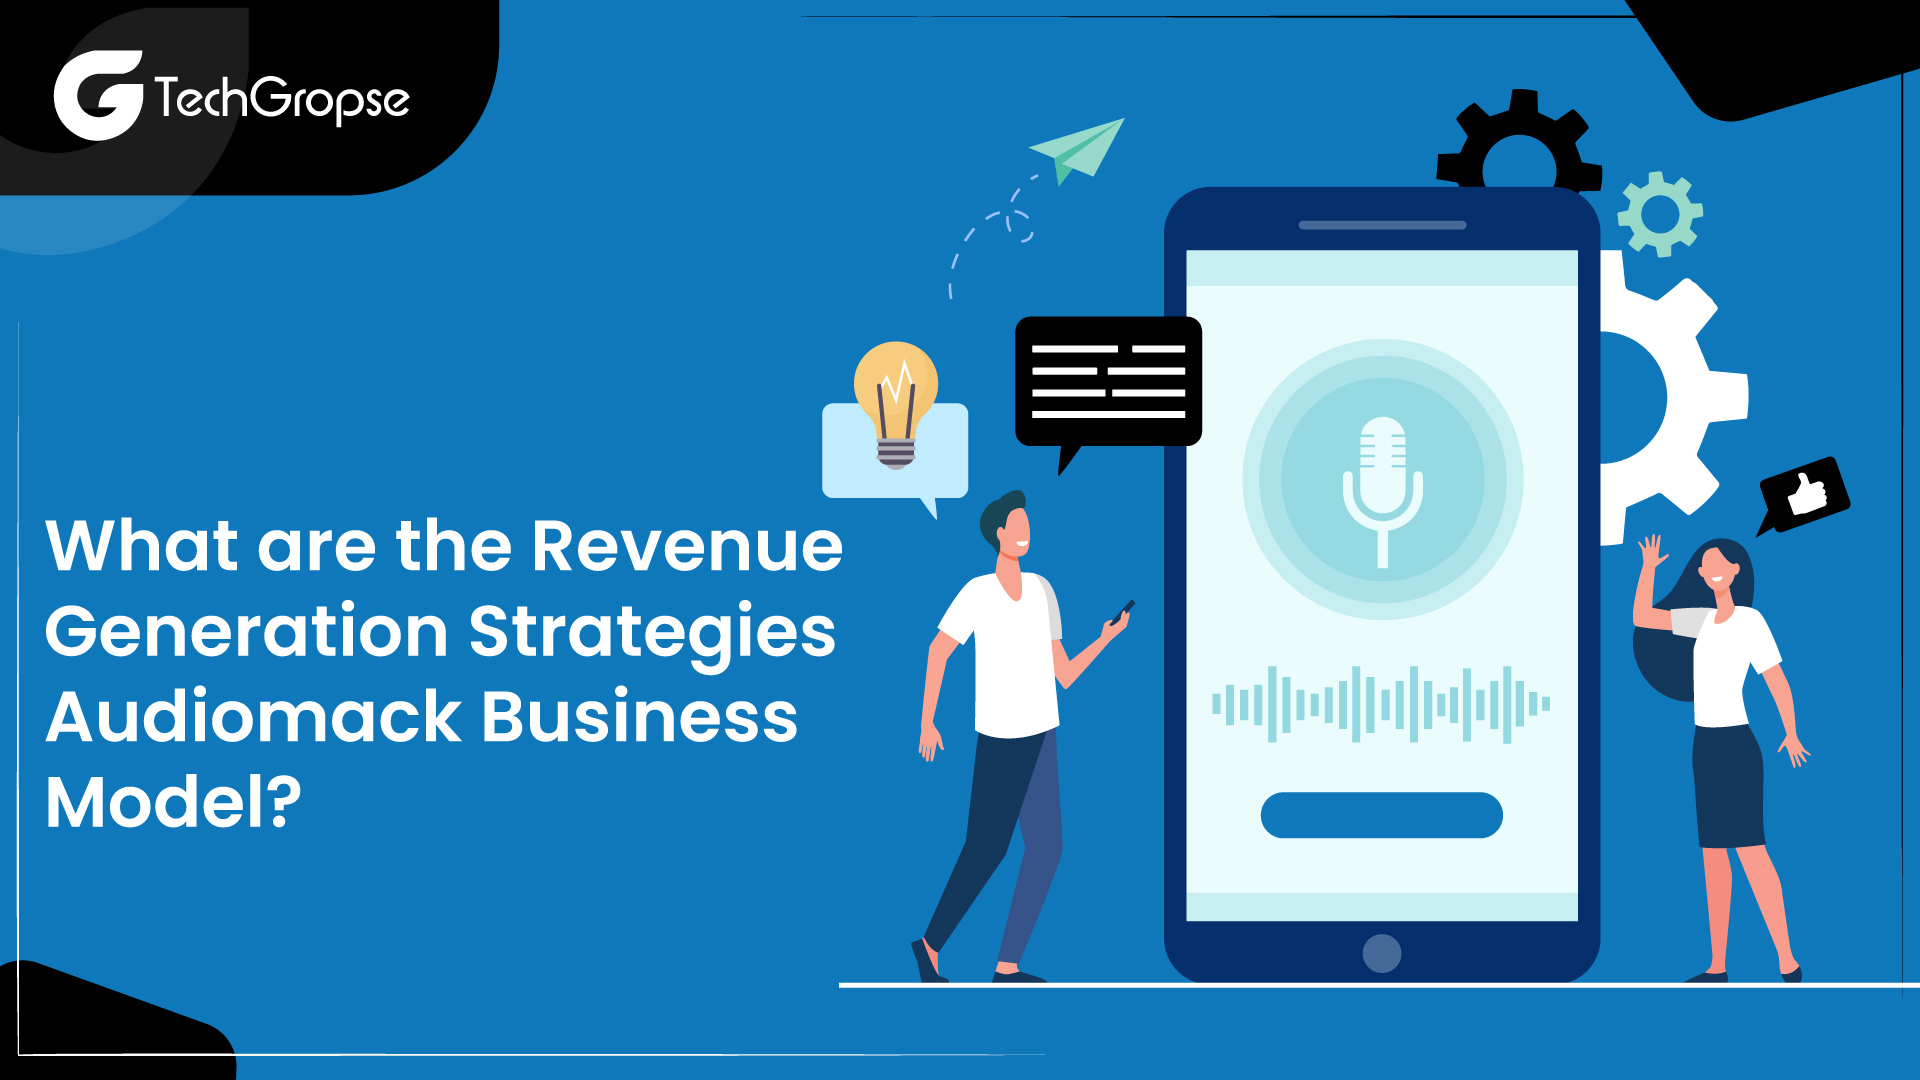 What are the Revenue Generation Strategies Audiomack Business Model?